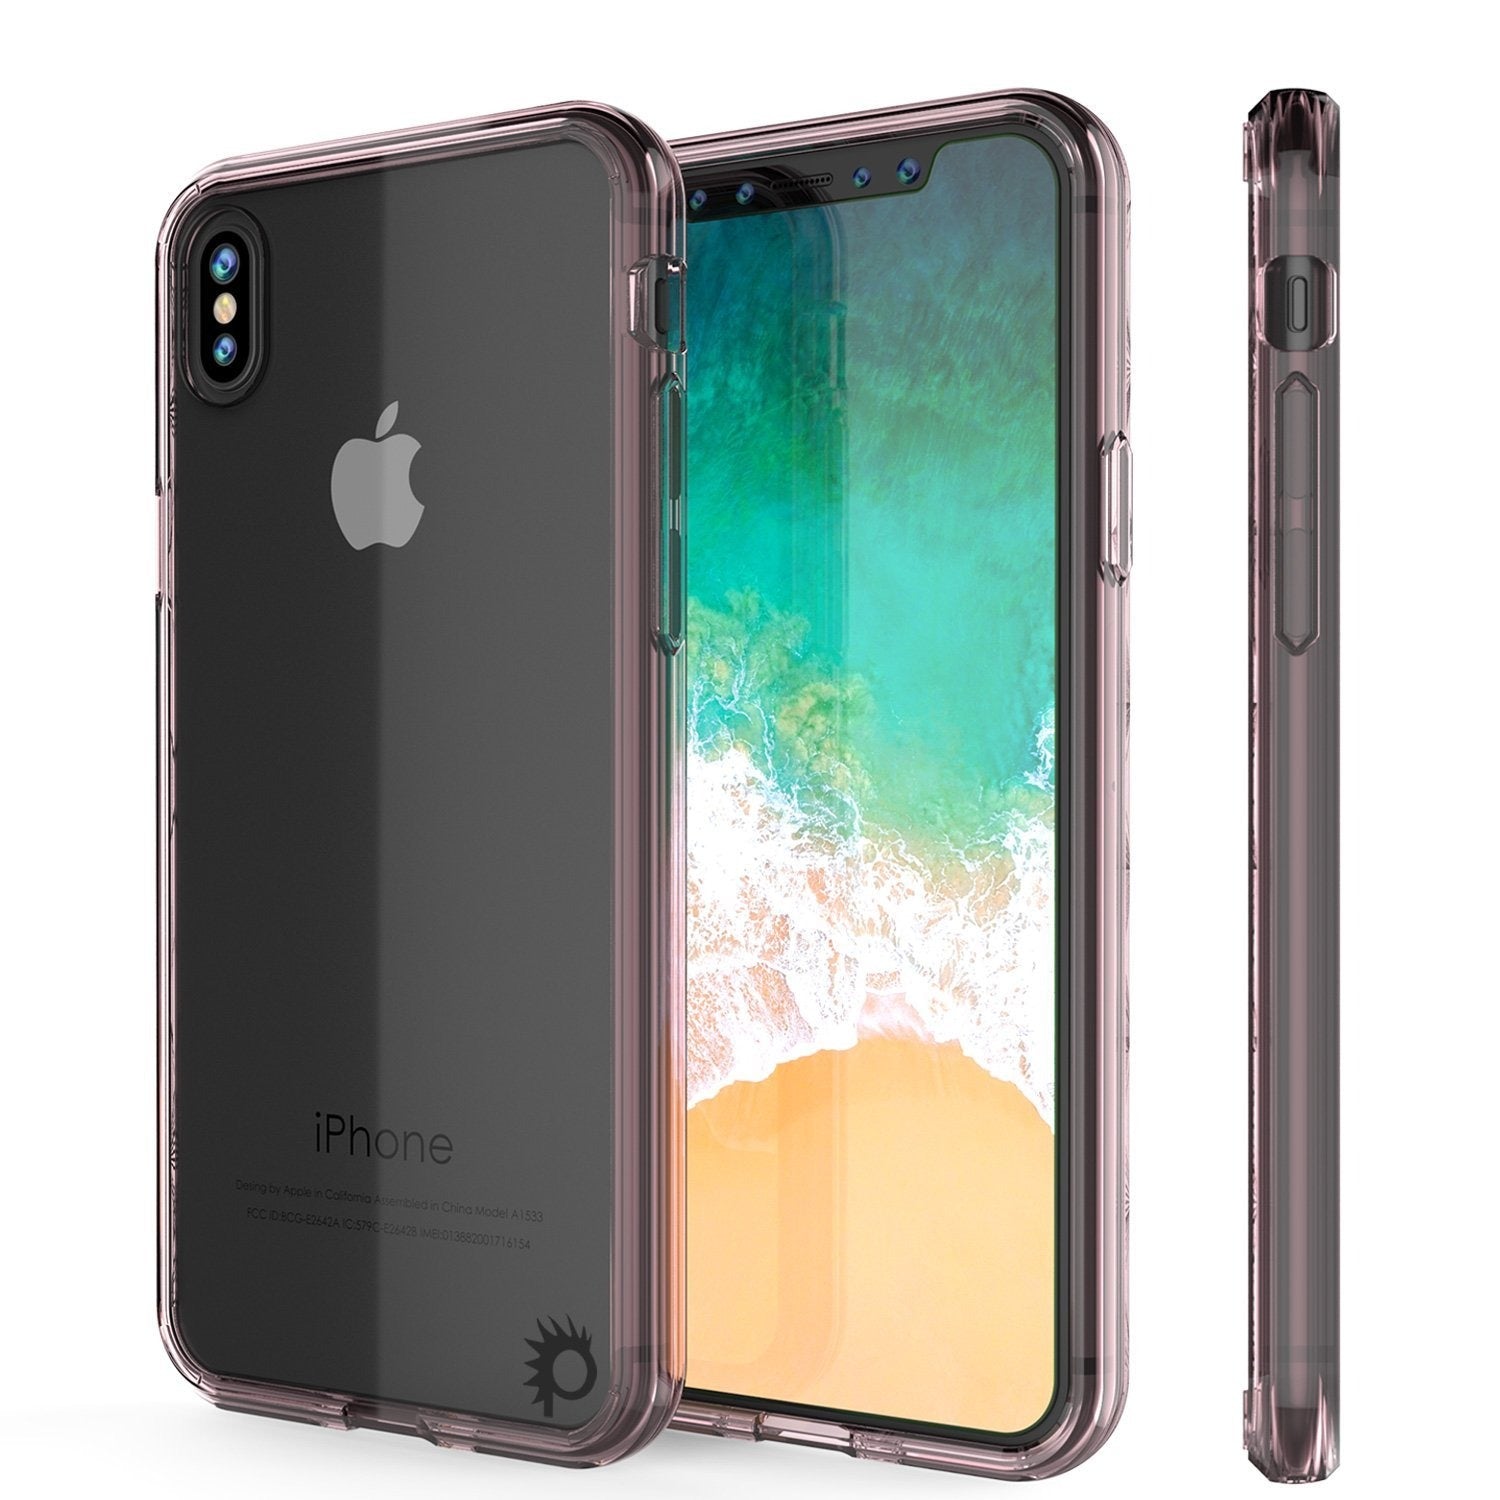 iPhone X Case, PUNKcase [LUCID 2.0 Series] [Slim Fit] Armor Cover W/Integrated Anti-Shock System [Crystal Pink]